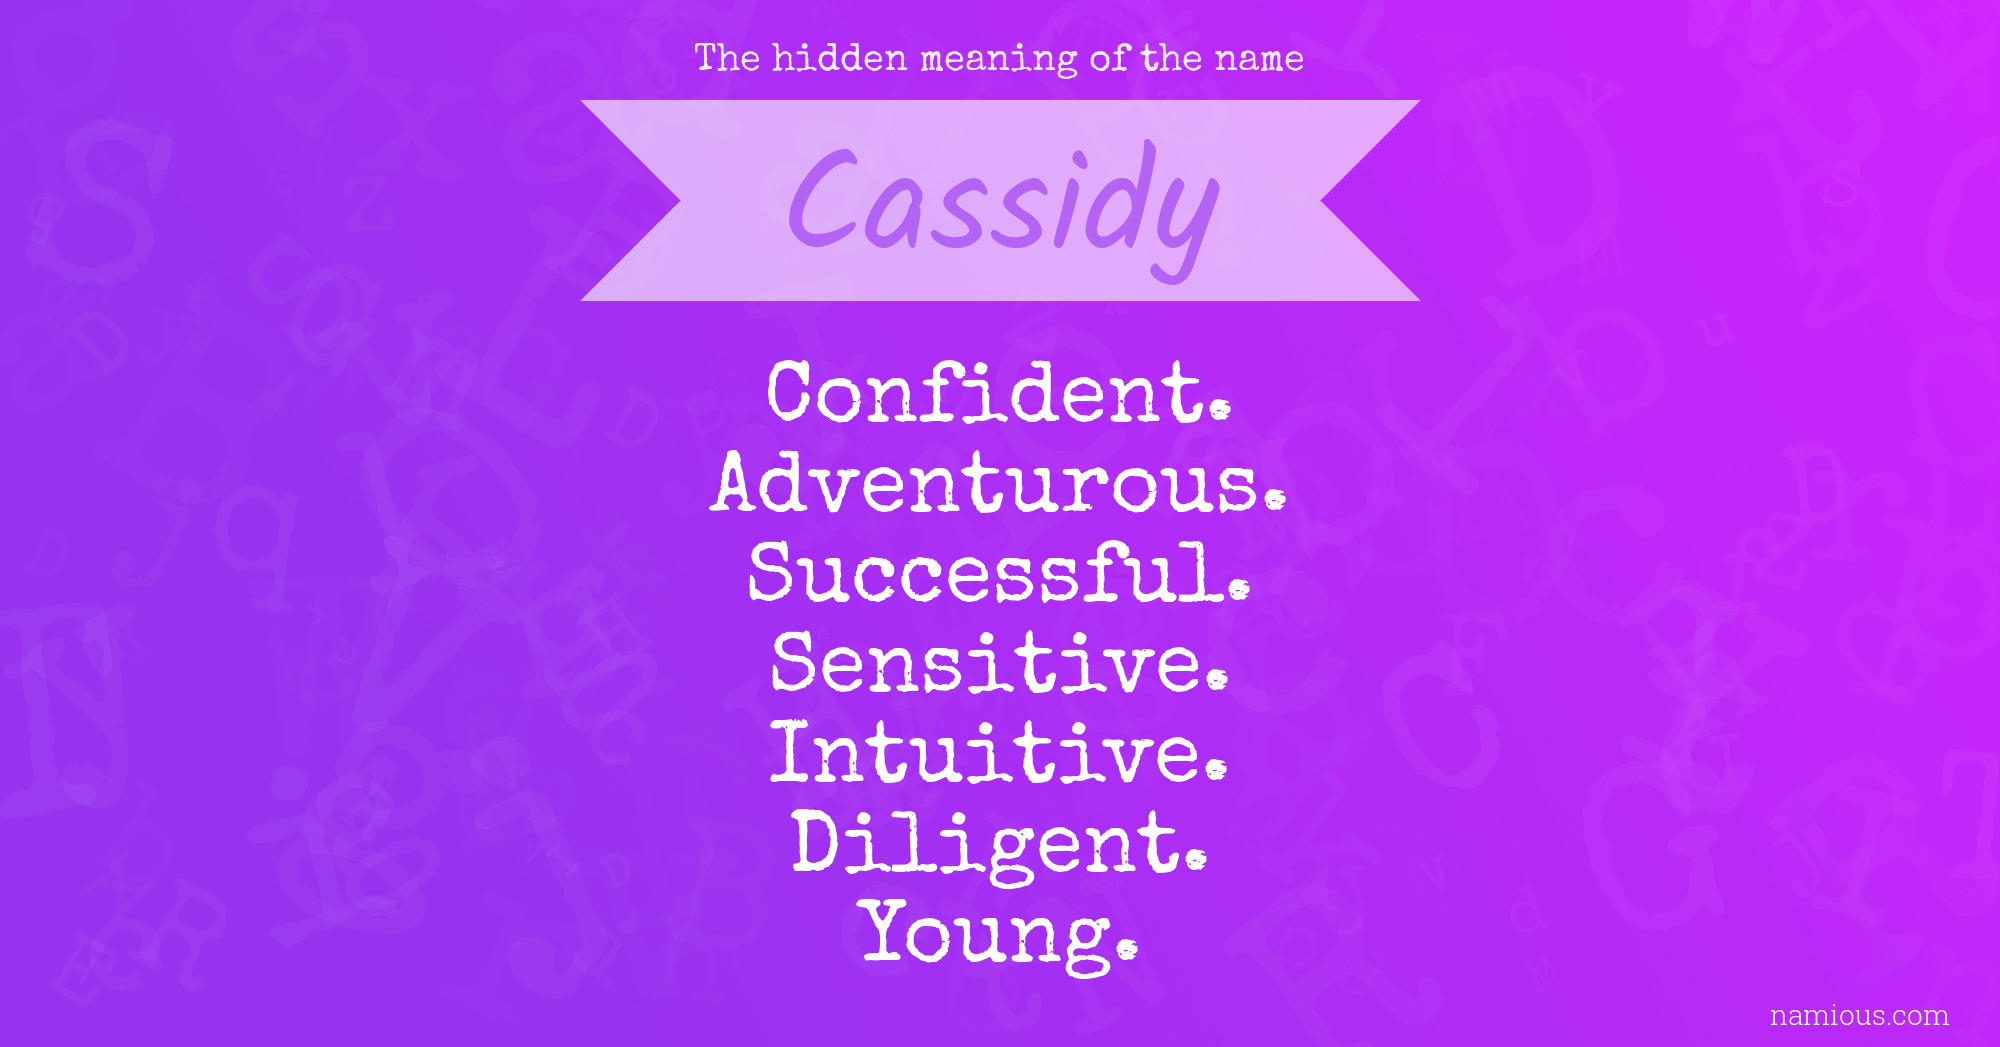 The hidden meaning of the name Cassidy | Namious